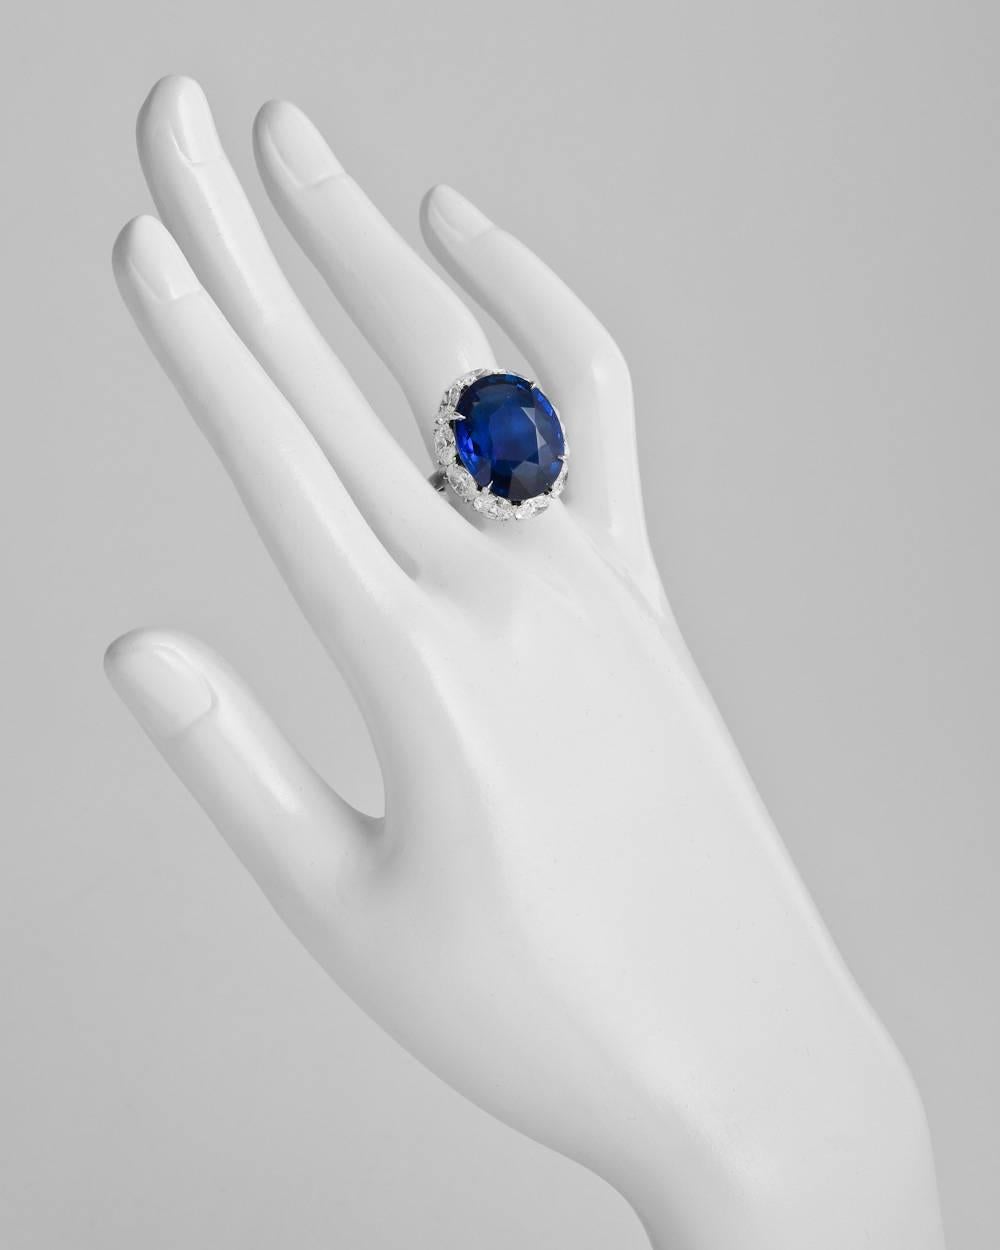 Ceylon sapphire and diamond ring, centering on an oval-shaped sapphire weighing 22.22 carats, with an oval-shaped diamond surround weighing approximately 4.10 total carats, mounted in platinum. Re-sizable.

AGL-certified: NATURAL SAPPHIRE
Carat